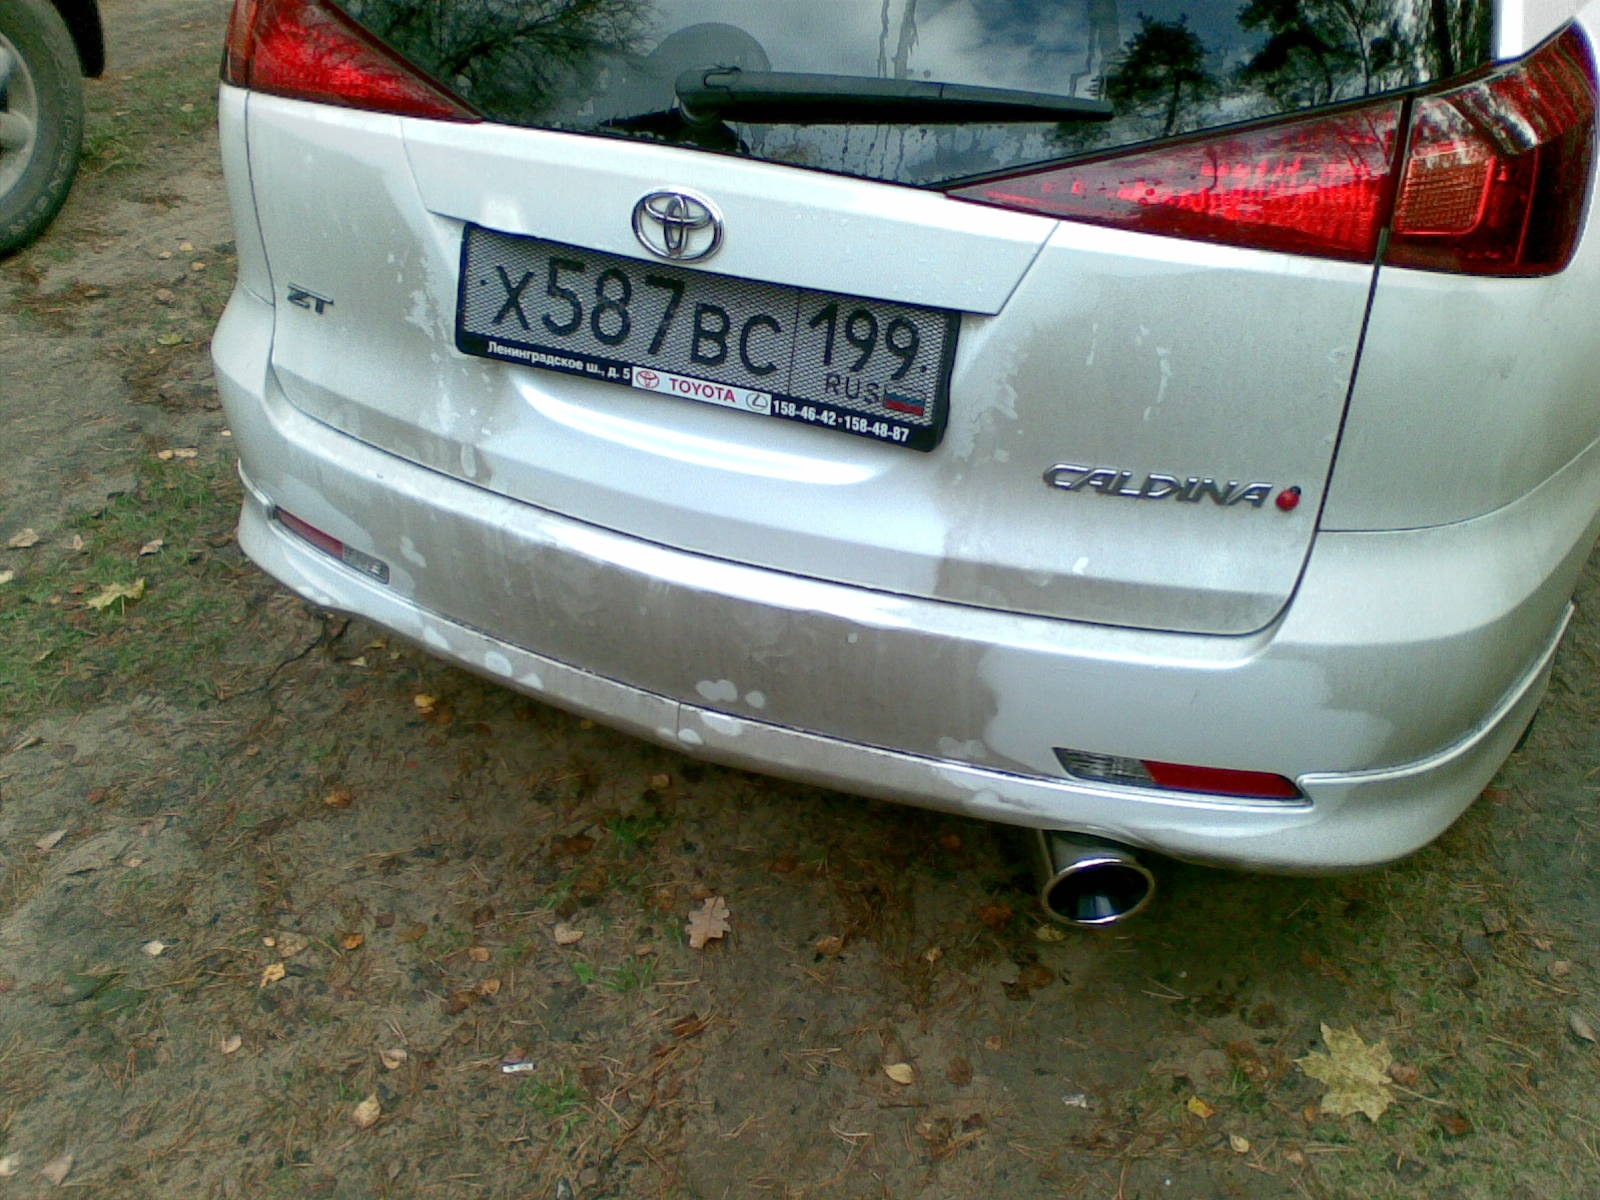 For a peculiar aesthetics and muffled sound instead of the standard muffler I installed a mg-race sports exhaust - Toyota Caldina 20 l 2005